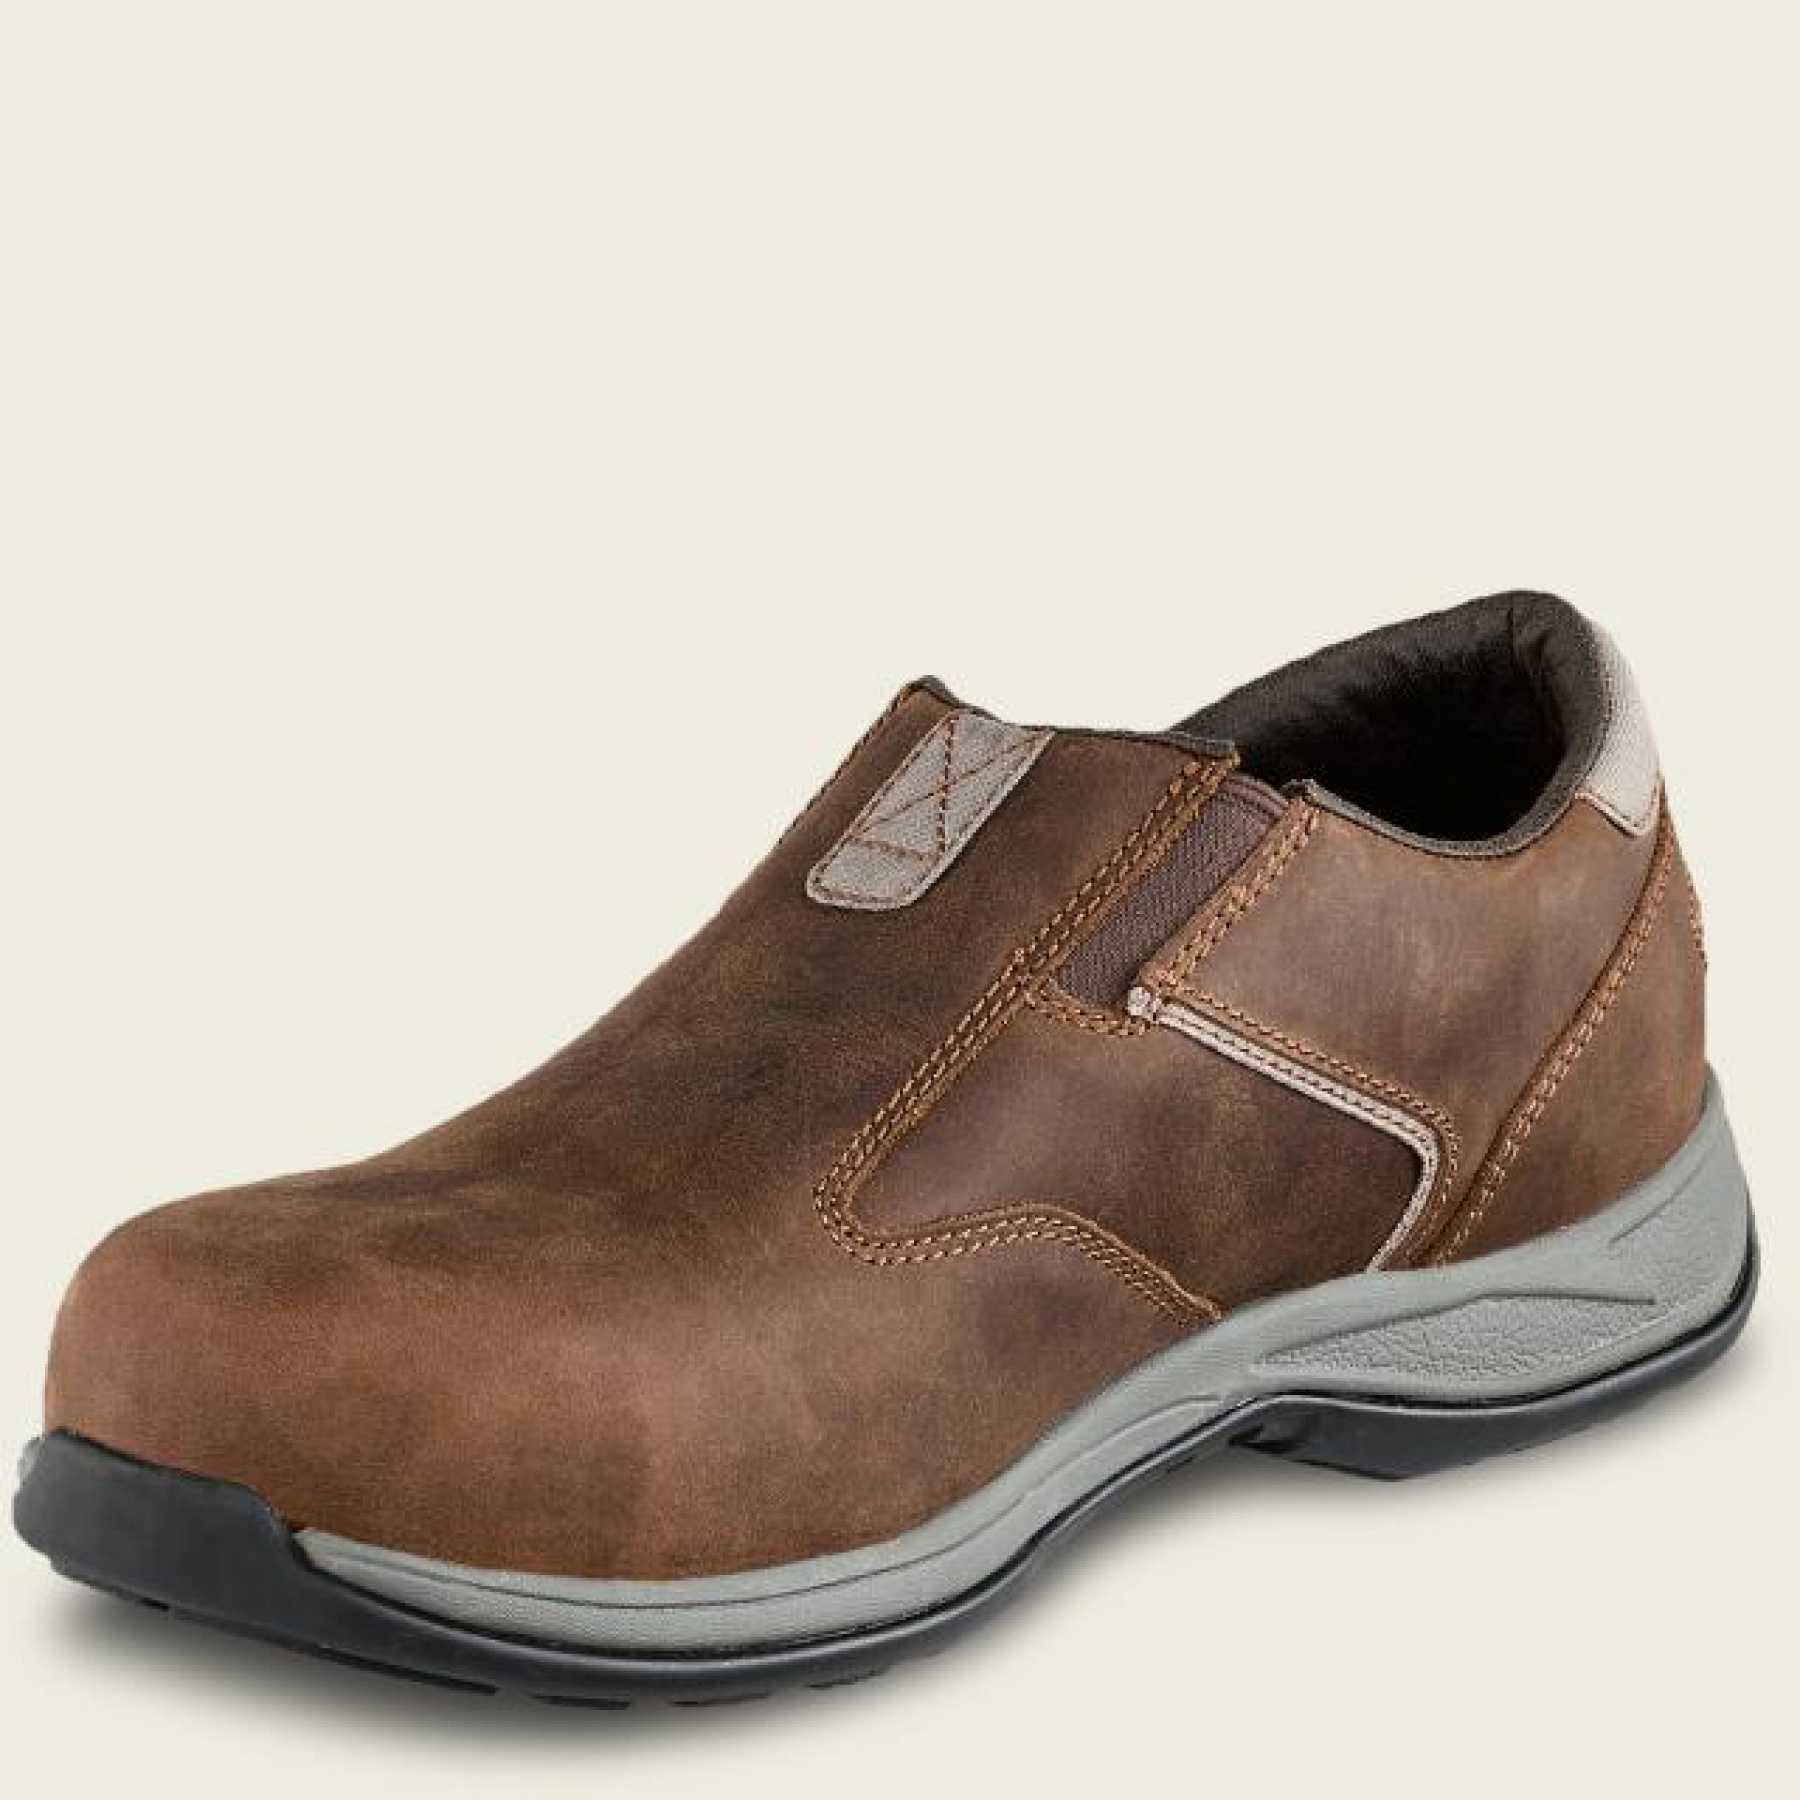 Buy Red Wing Slip-On Safety Shoes | Gents Footwear, Safety Footwear ...